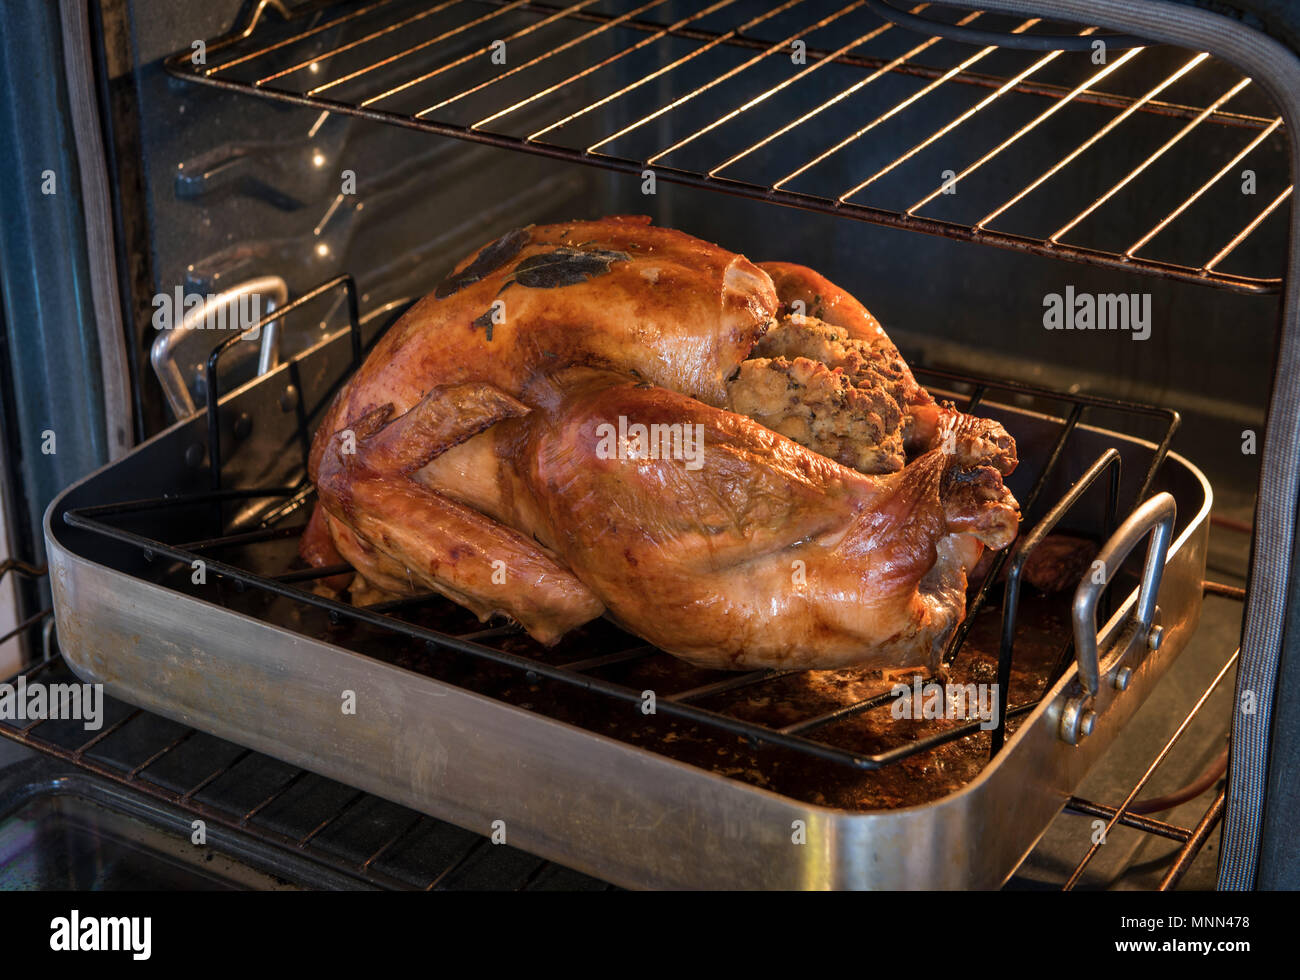 Traditional holiday meal, oven roasted turkey. Stock Photo